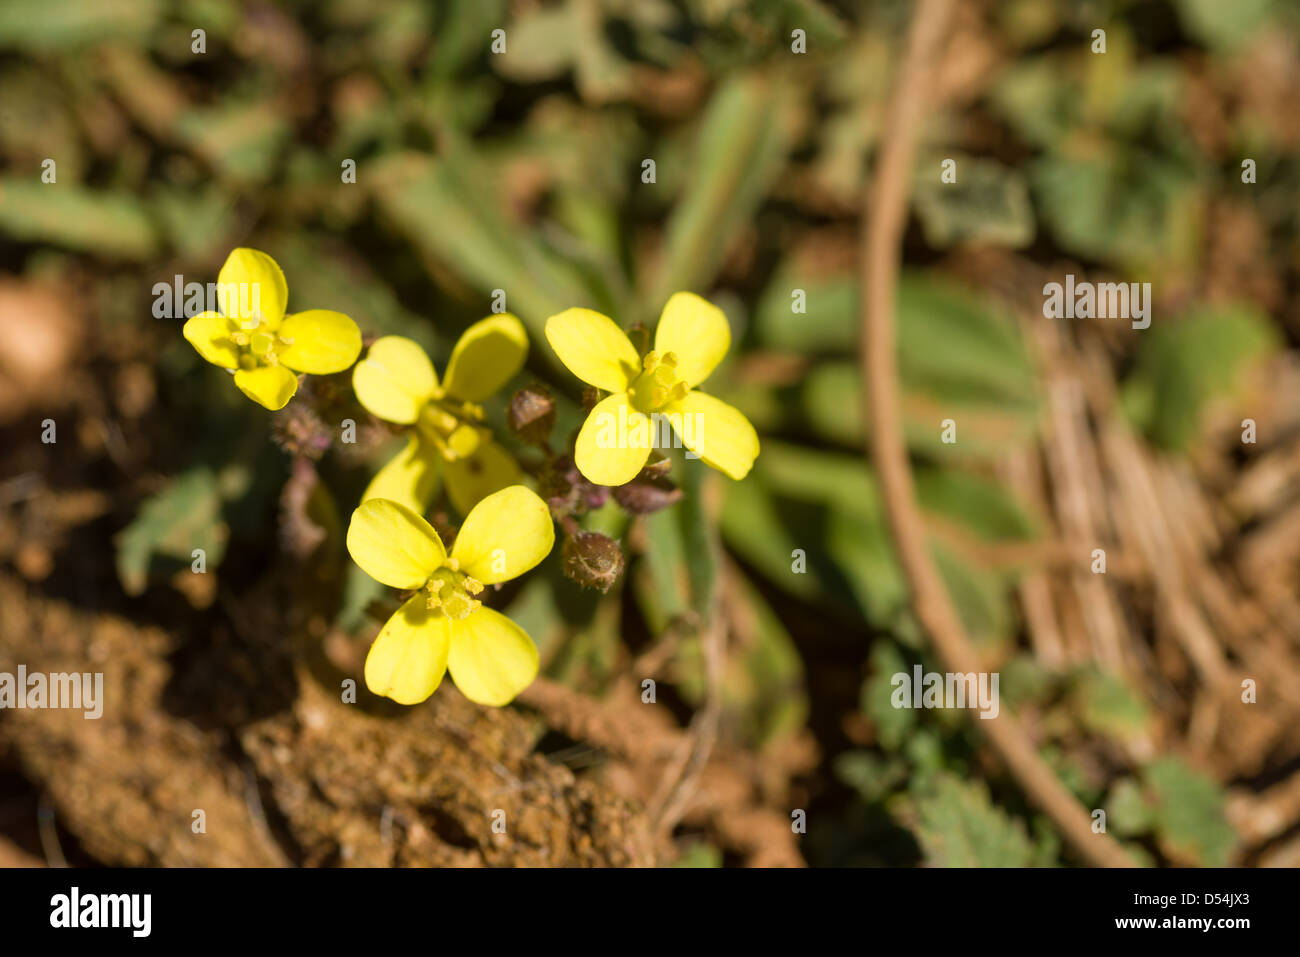 African mustard flowering, the plant sitting on sandy soil Stock Photo